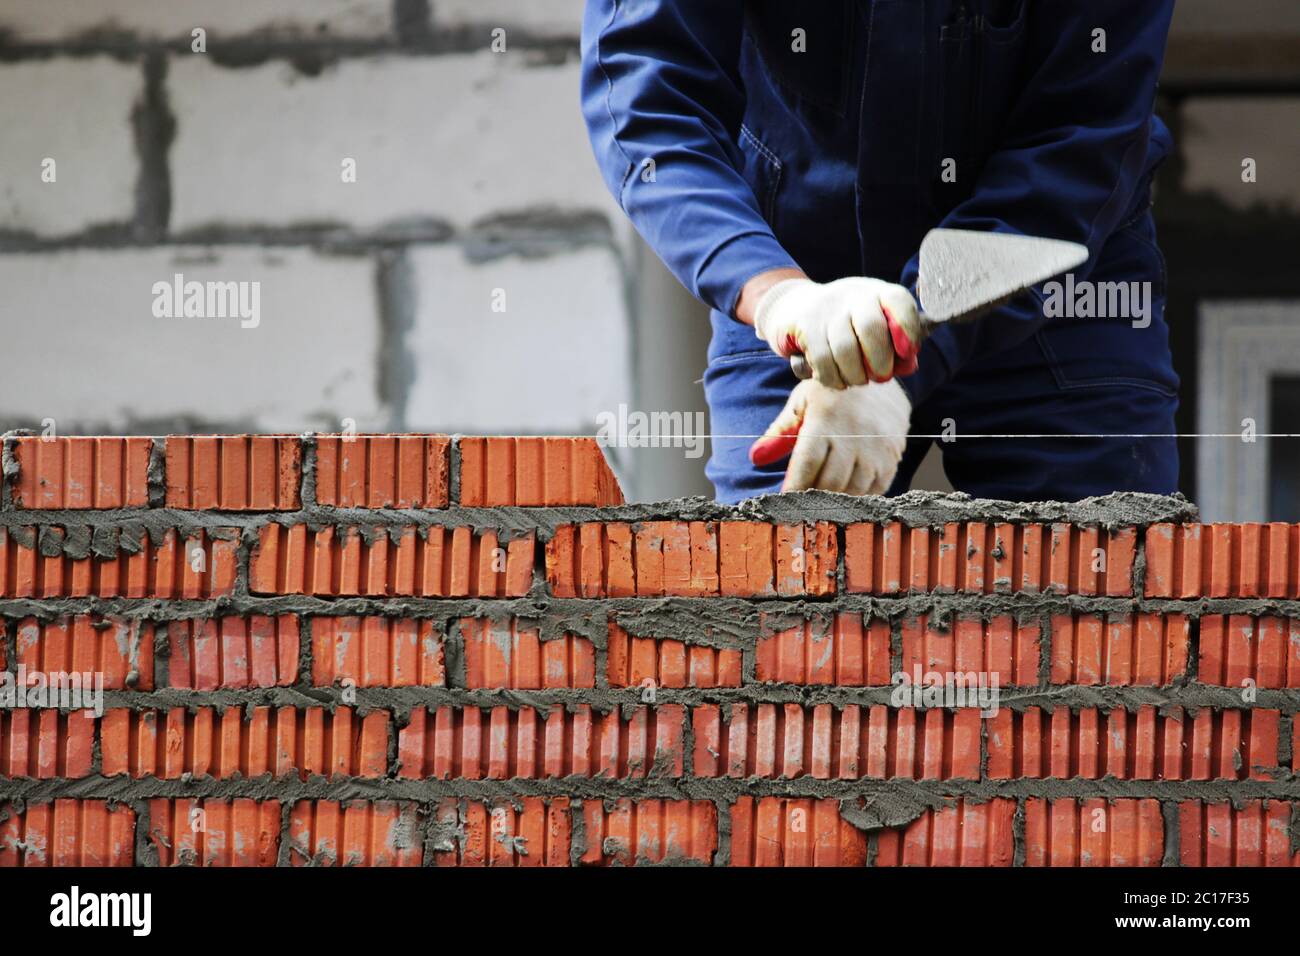 professional construction worker laying bricks and building house on industrial site. Stock Photo